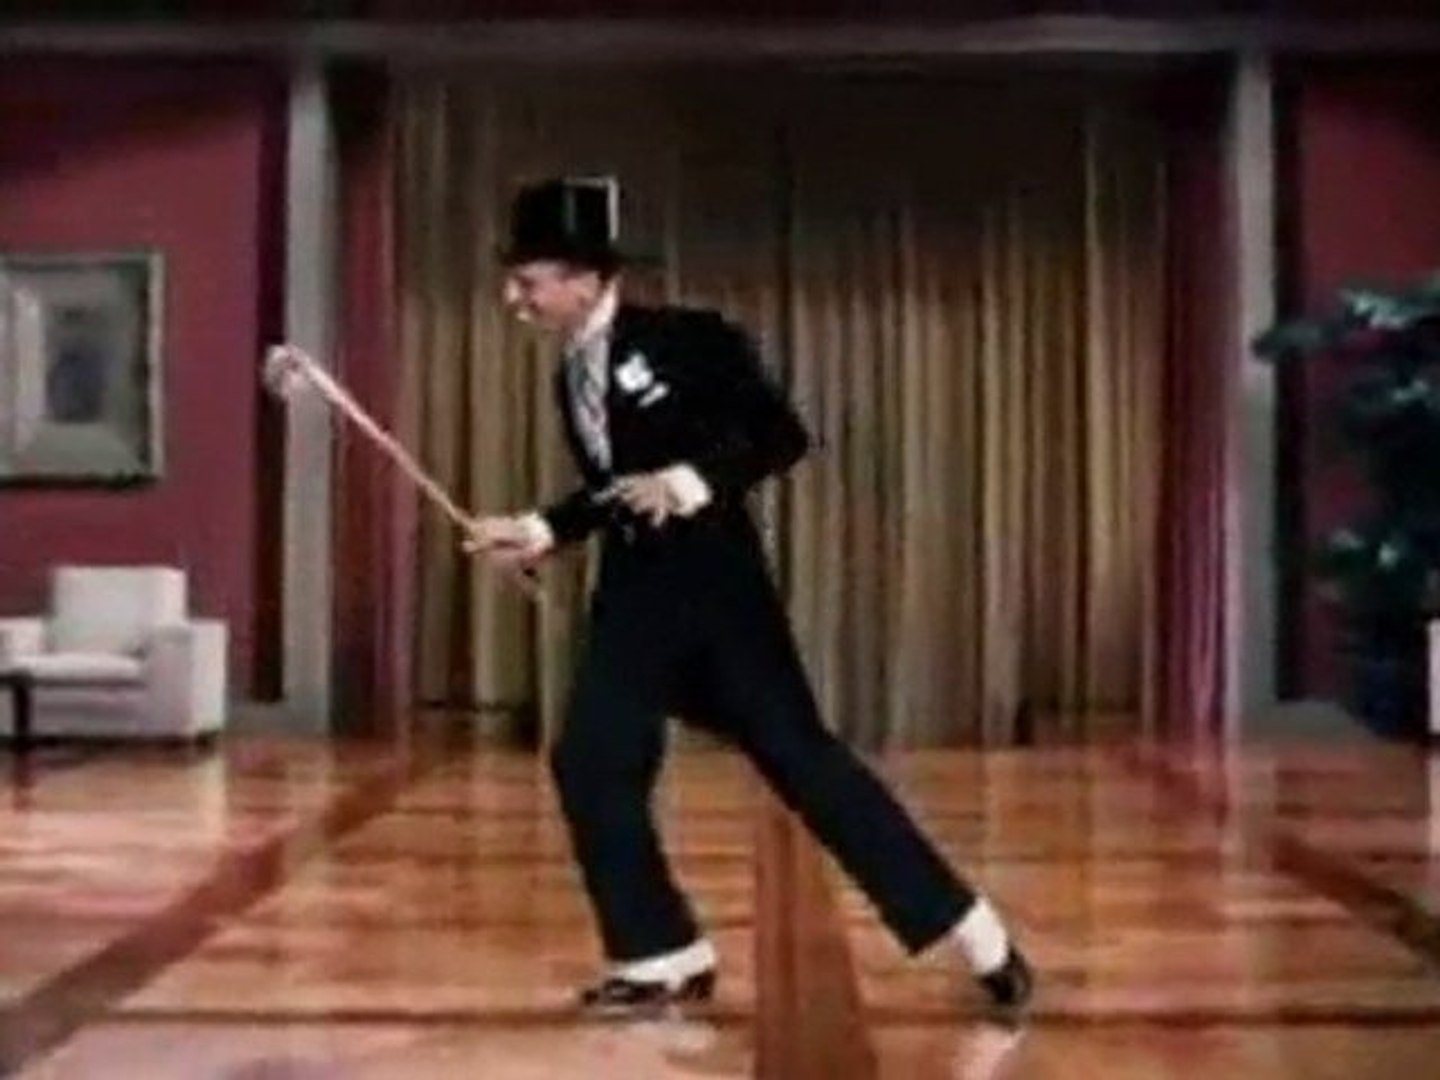 Fred Astaire Puttin On The Ritz Video Dailymotion Fred astaire — puttin' on the ritz 02:33. fred astaire puttin on the ritz